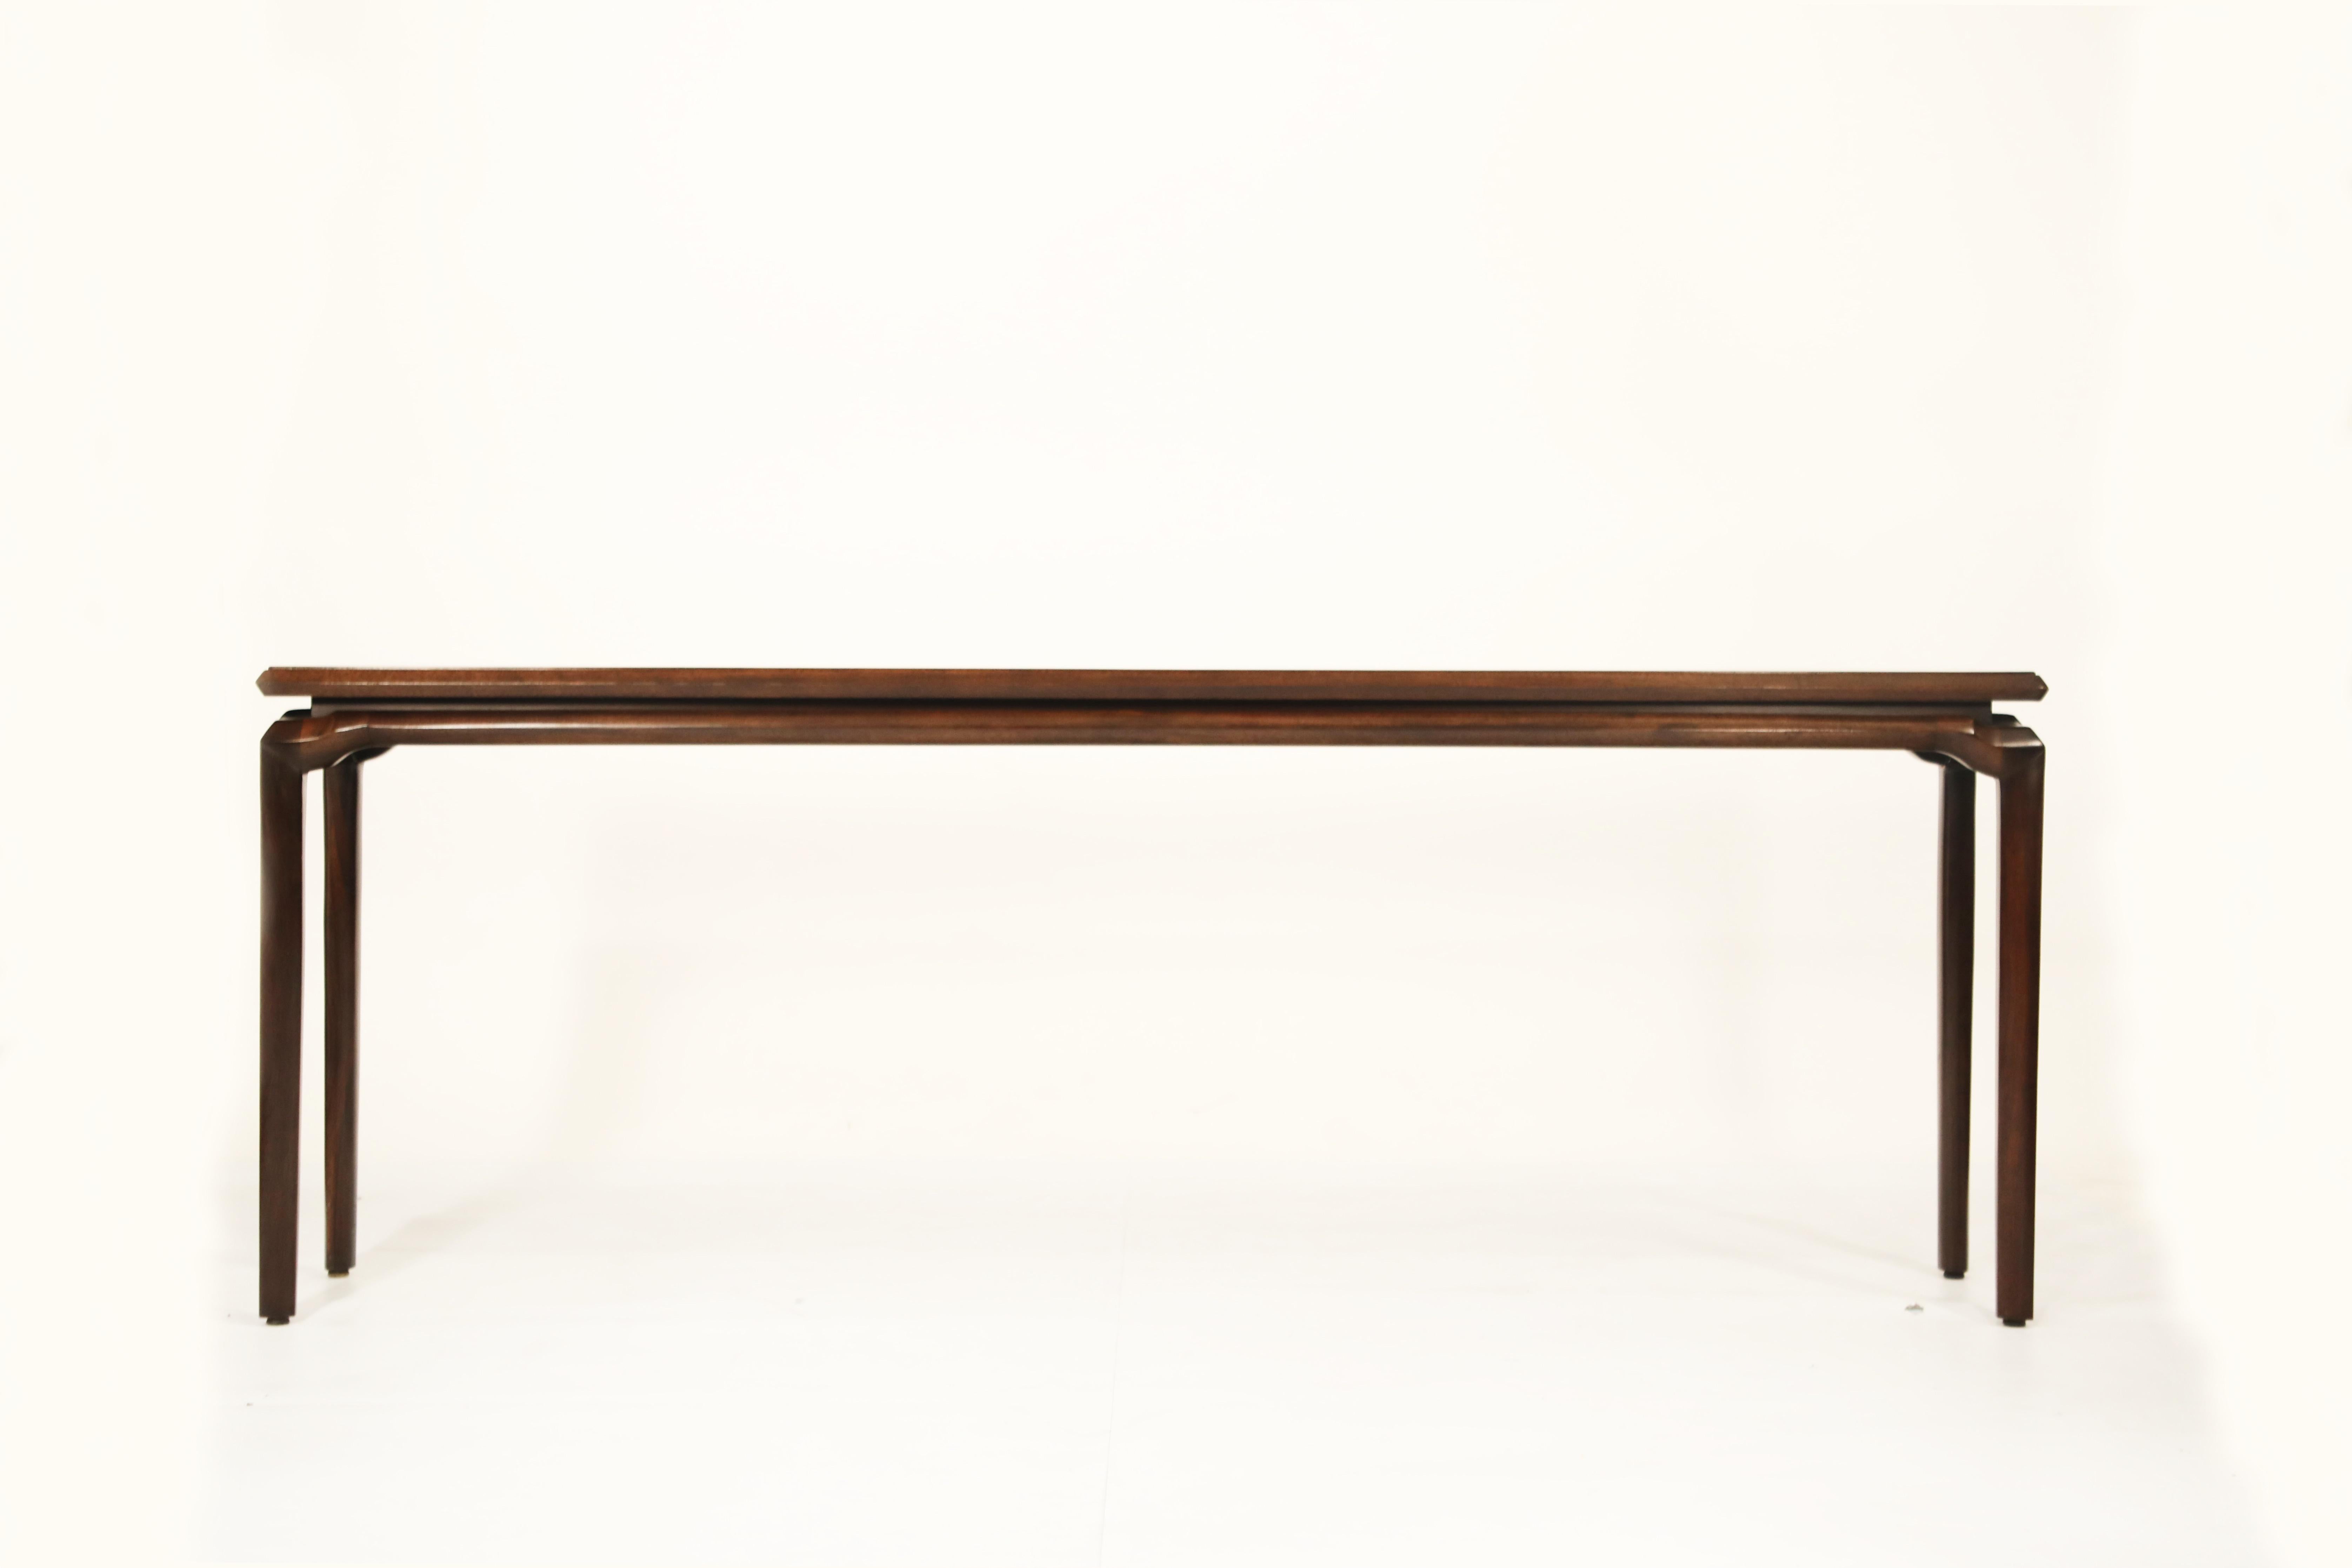 This incredible sculptural console table by Maurice Bailey for Monteverdi-Young is the perfect solution for the interior designer who needs a gorgeous looking wide console table that is also narrow in depth. Whether it be for an entryway or behind a